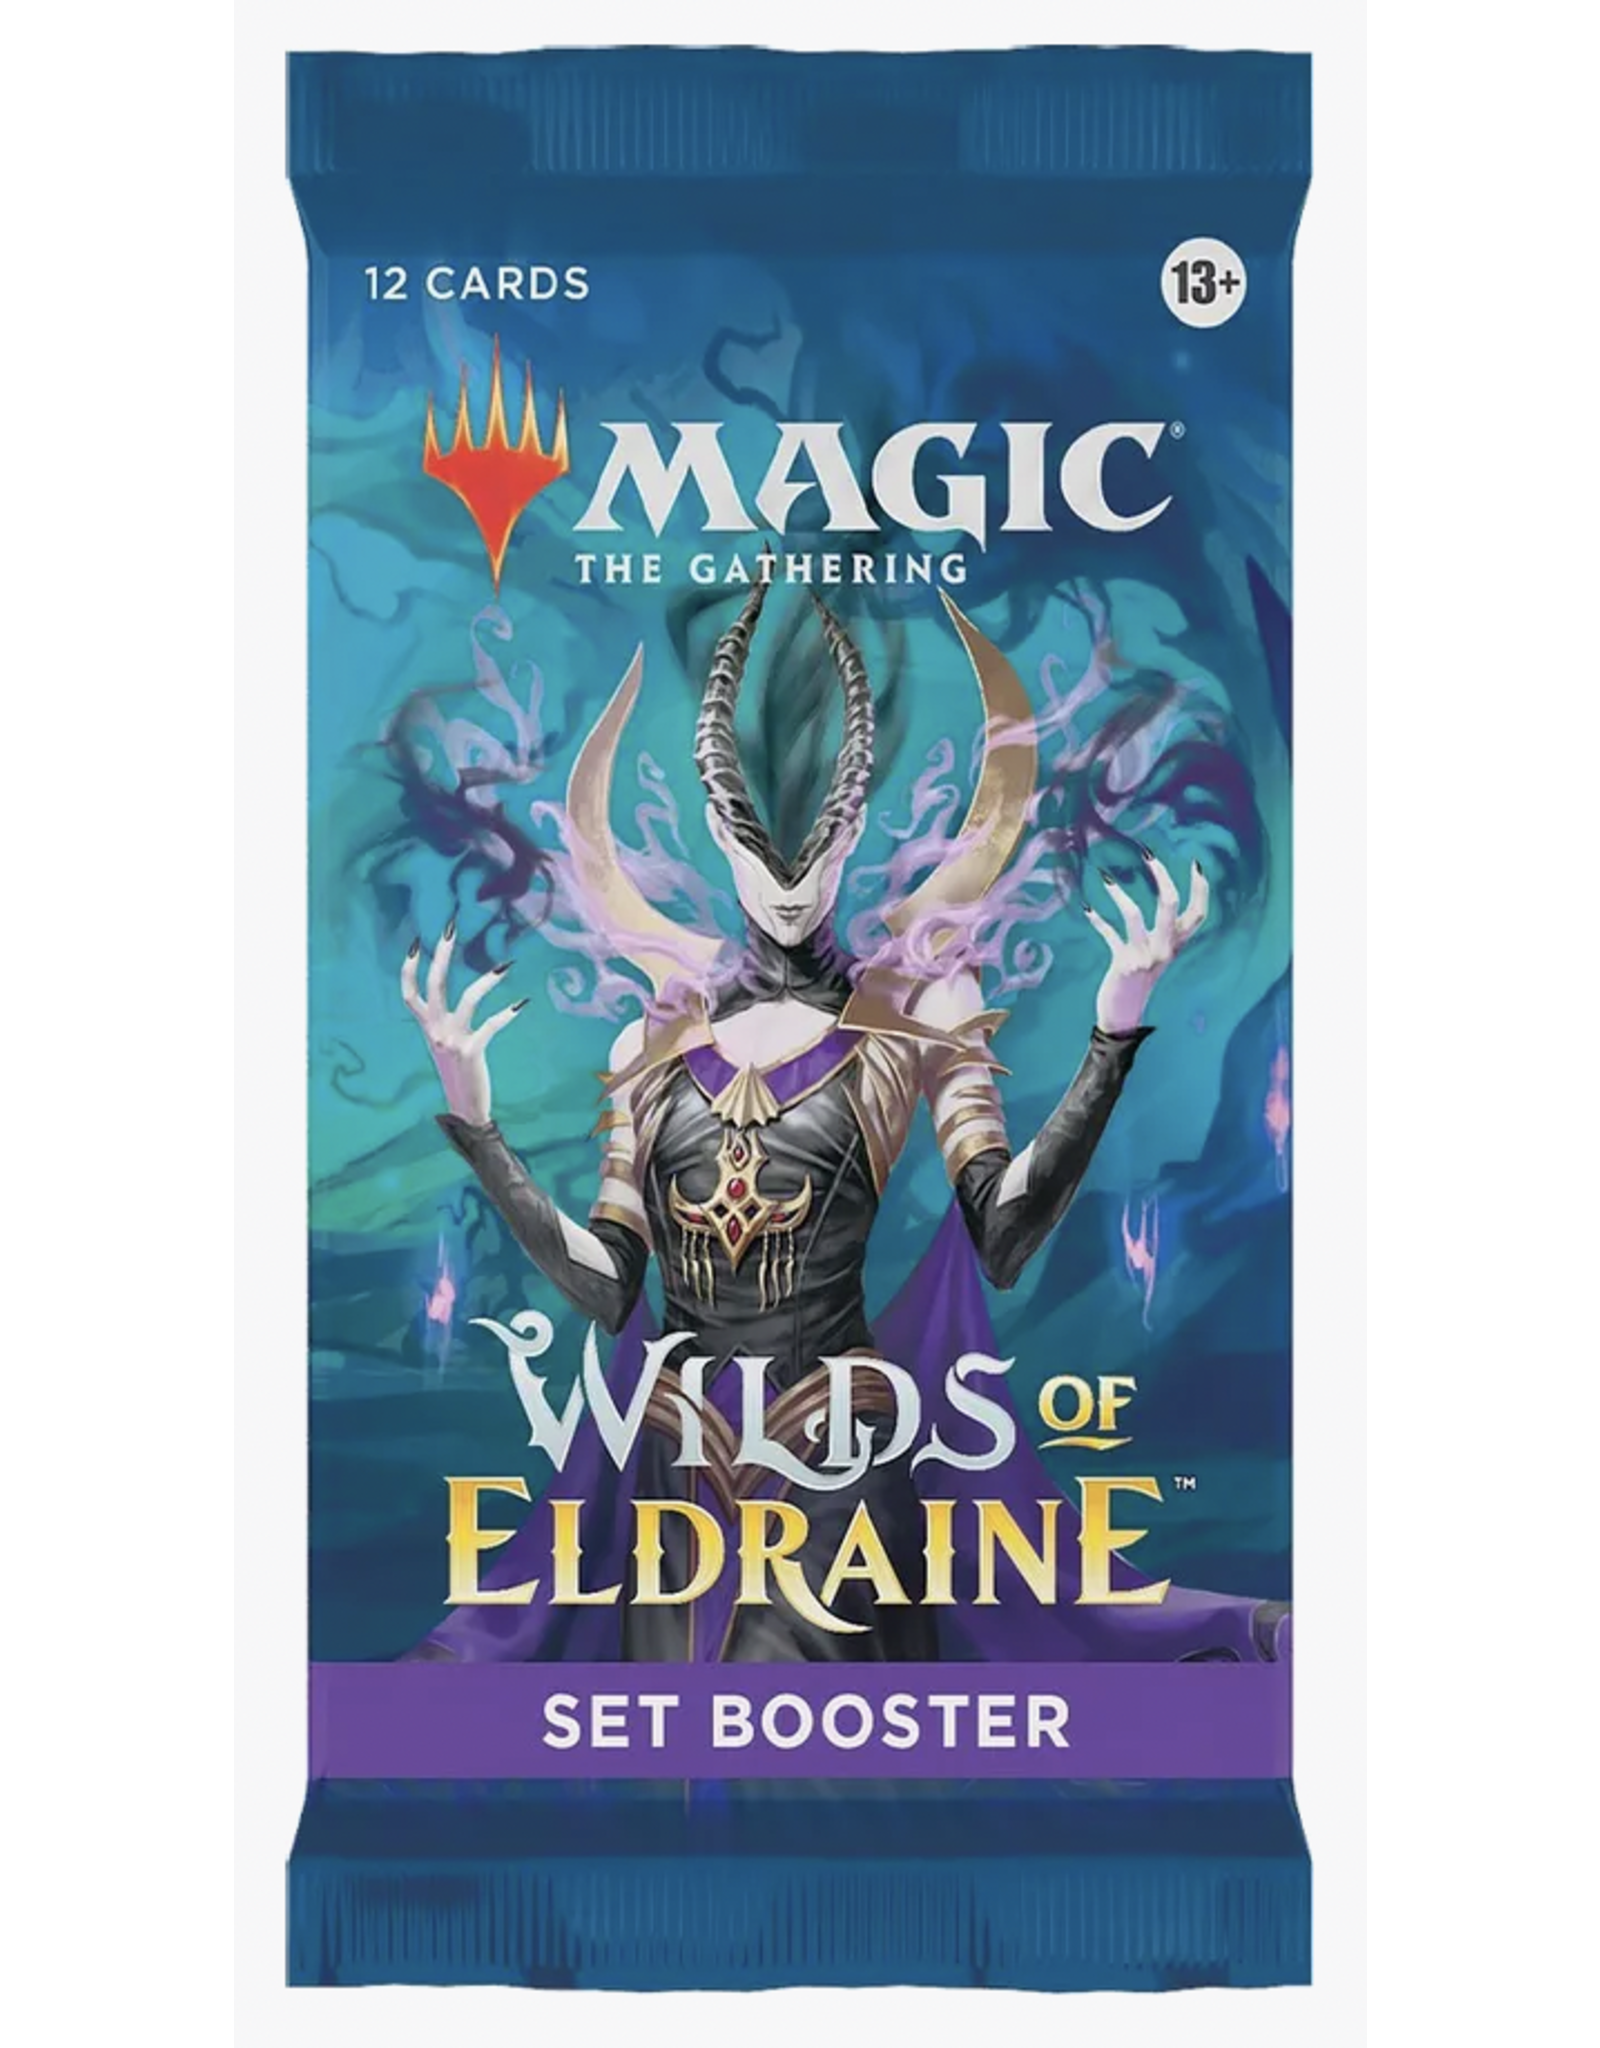 Magic Magic the Gathering CCG: Wilds of Eldraine Set Booster Pack